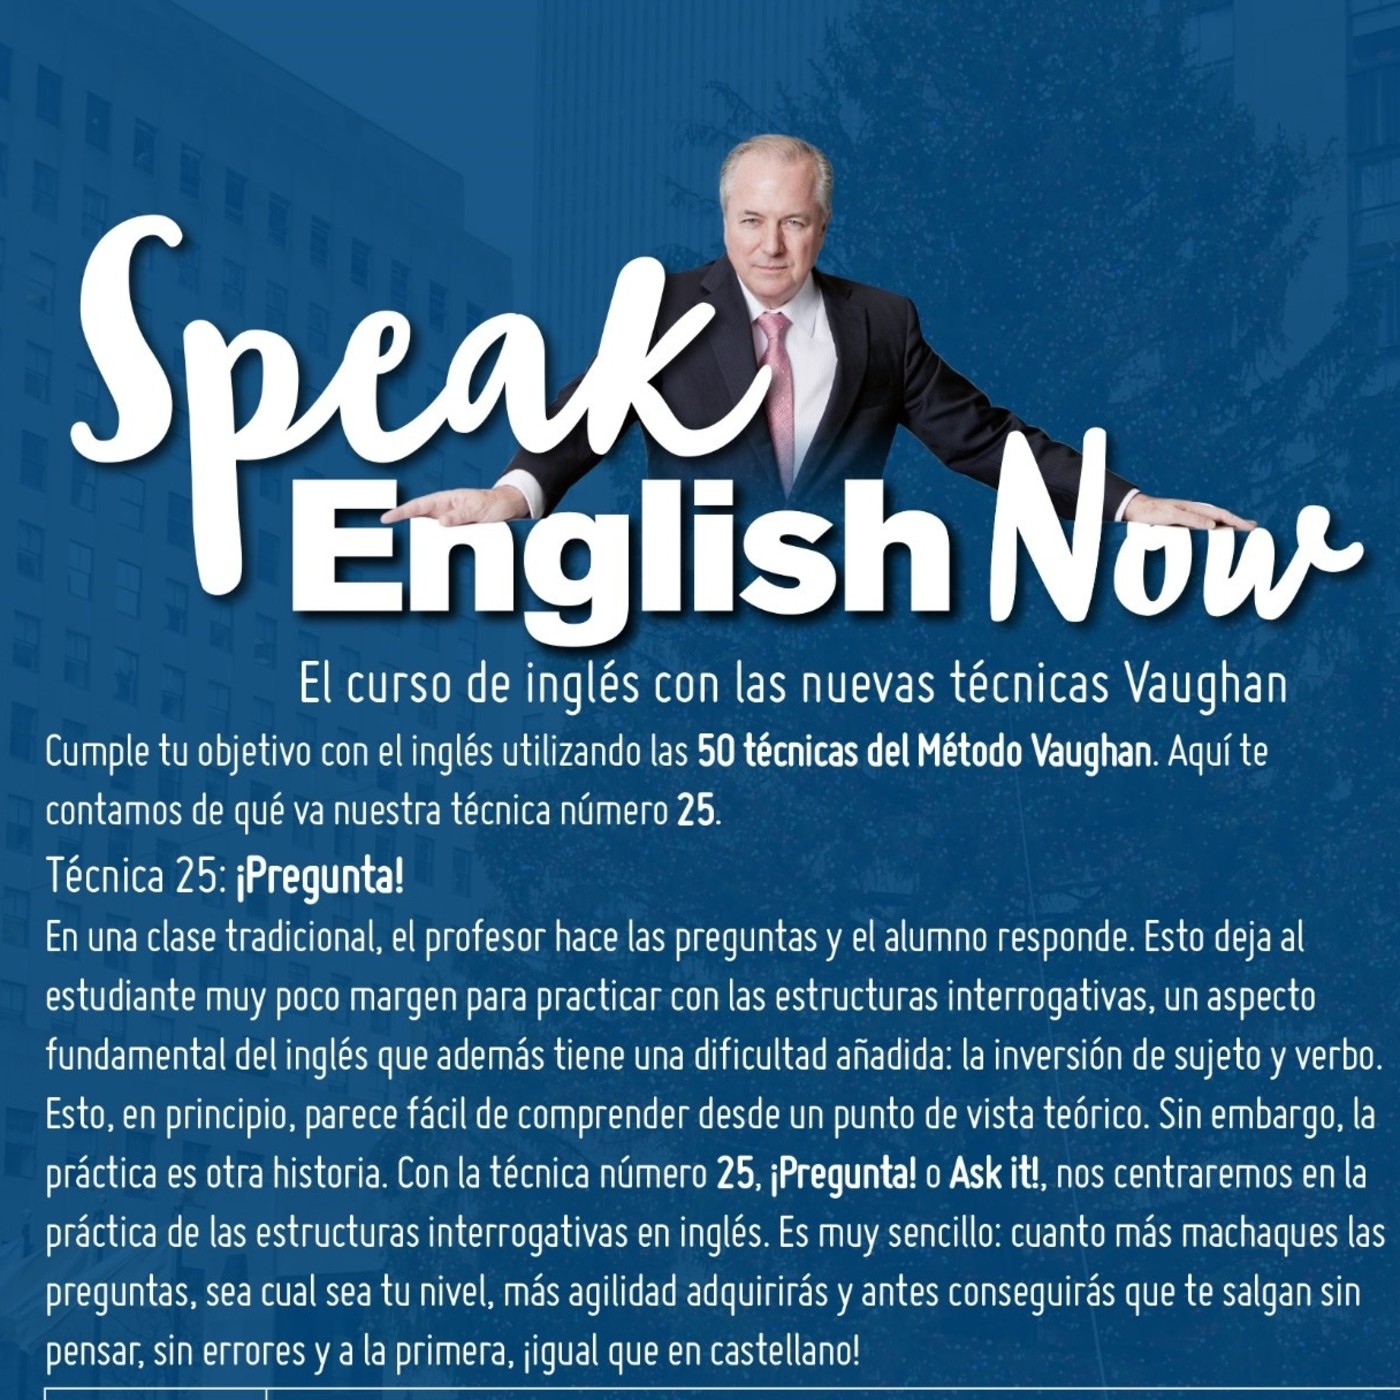 Speak English Now by Vaughan Libro 19